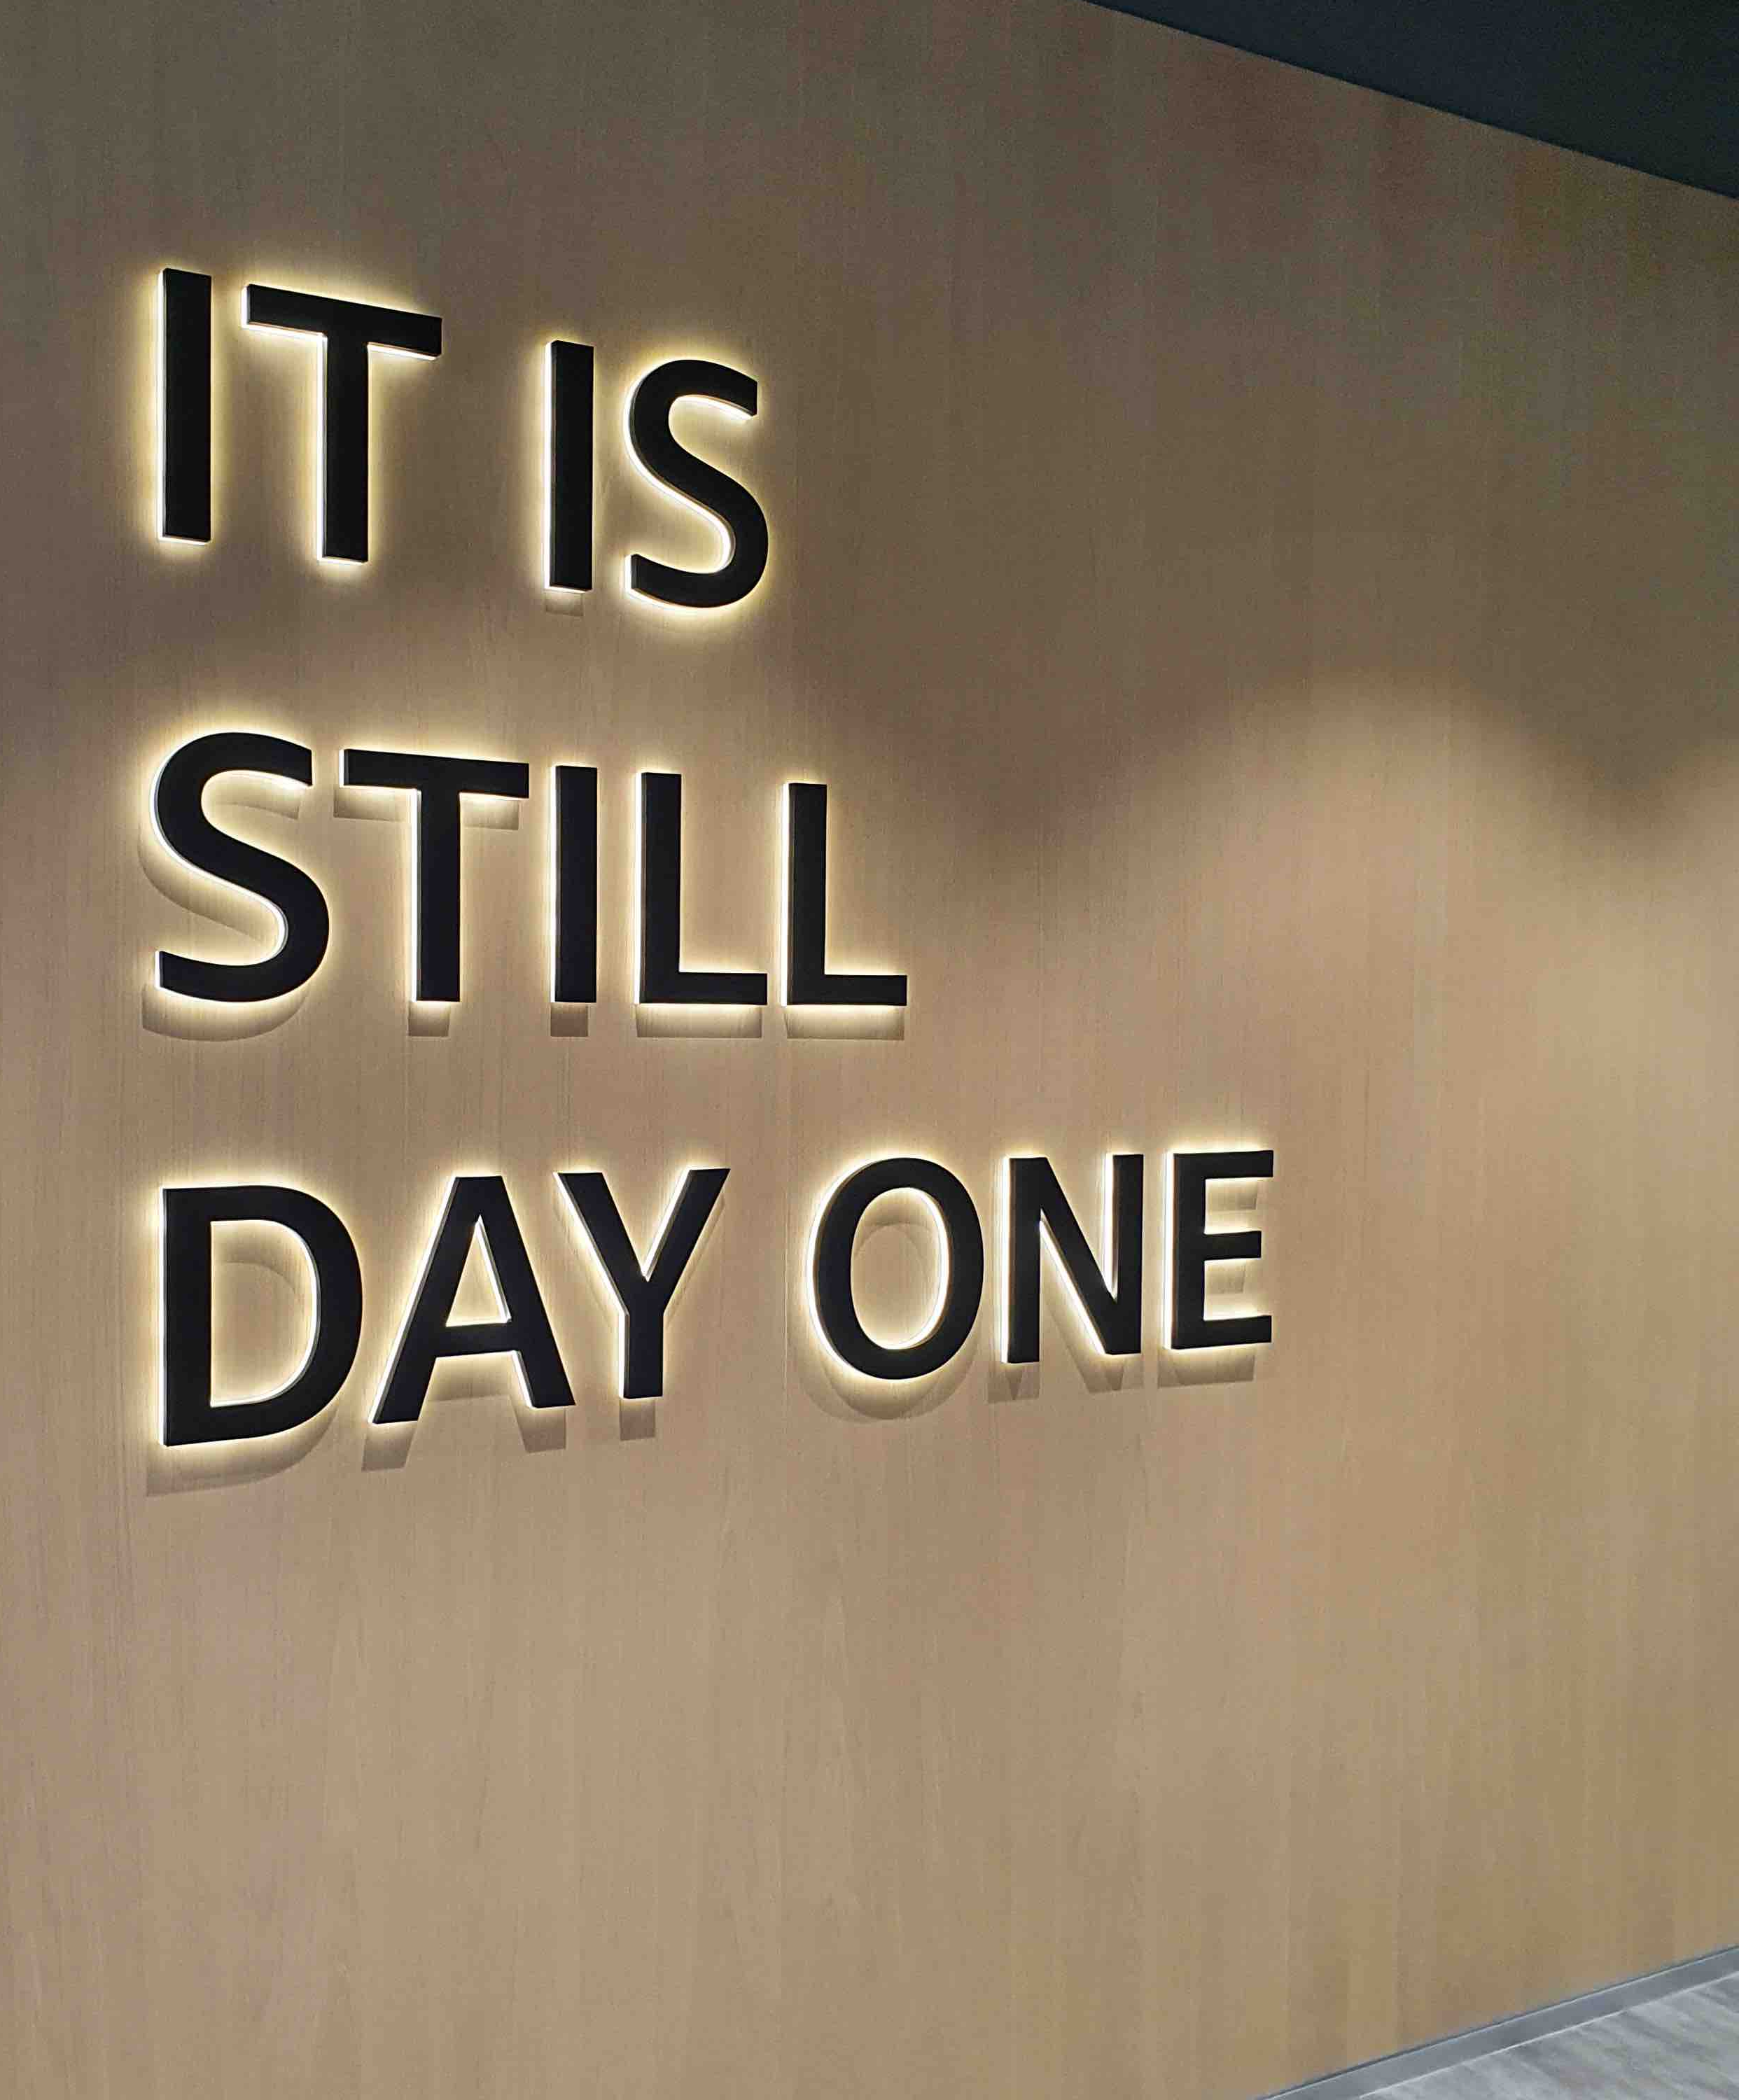 Every day is day 1